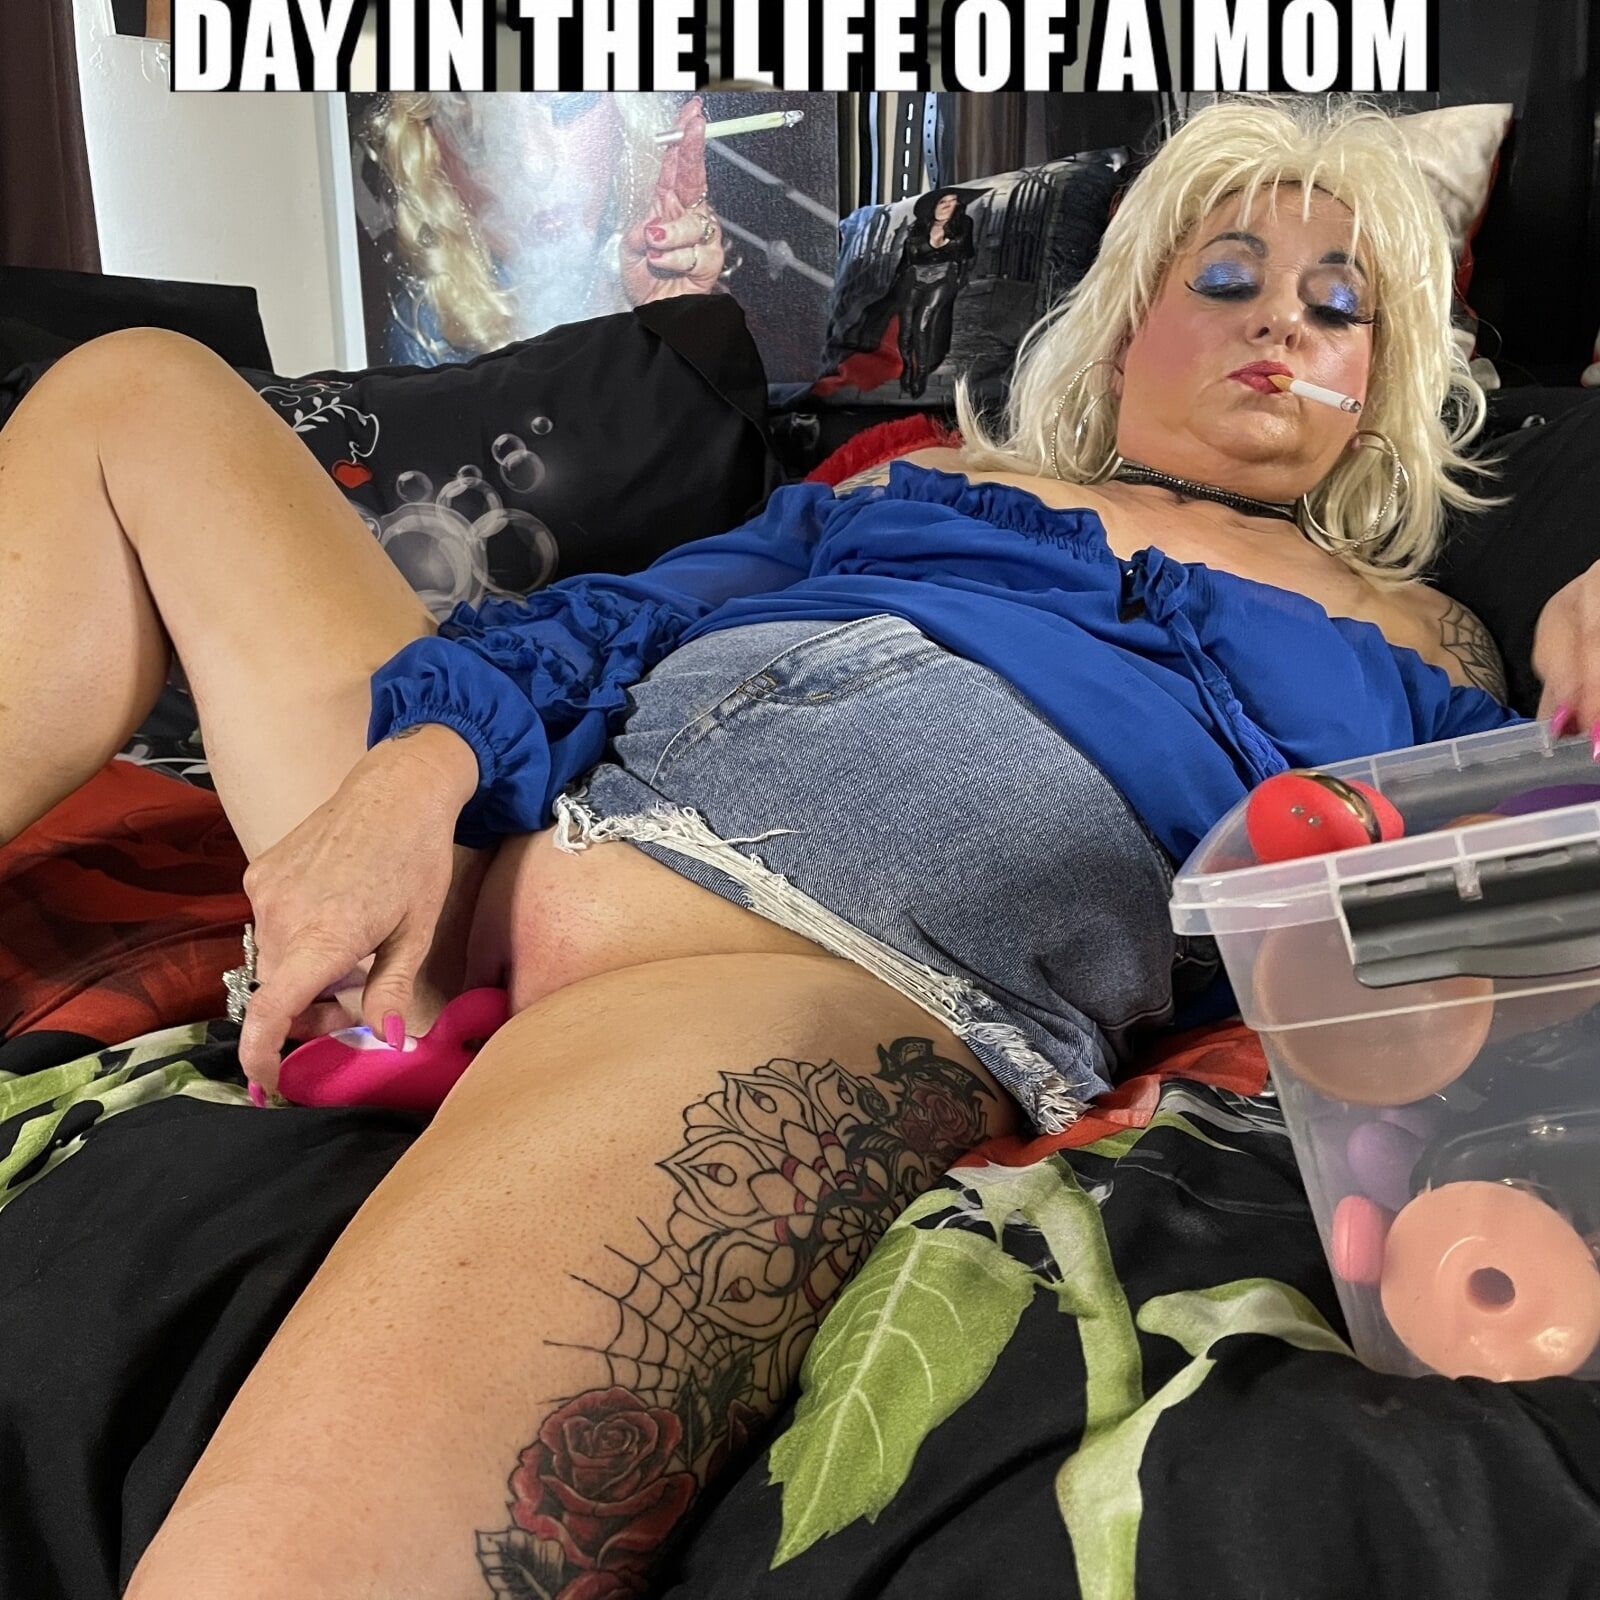 SHIRLEY THE LIFE OF A MOM #44